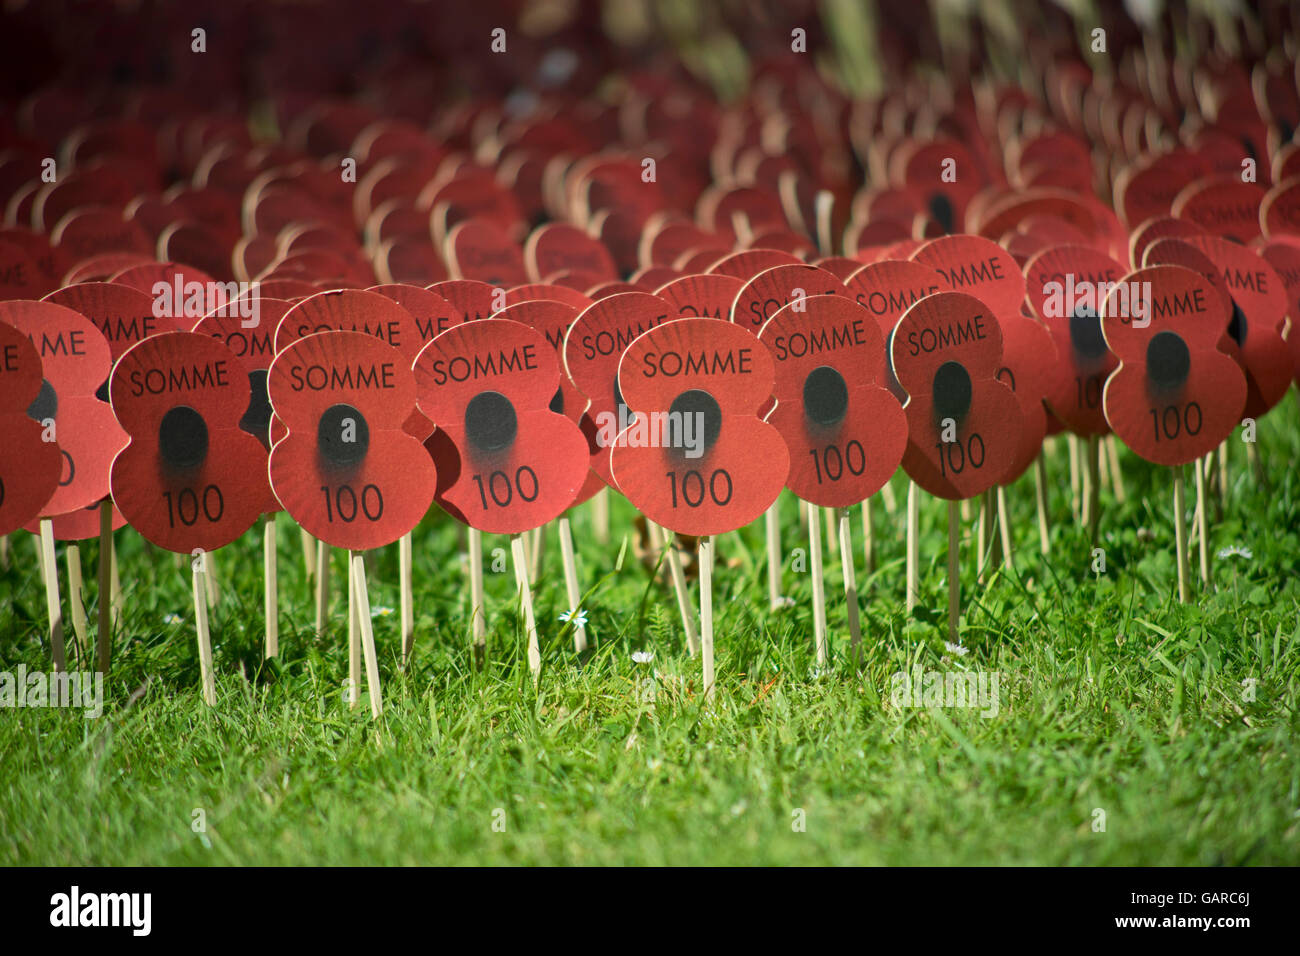 Field of poppies outside Westminster Abbey commemorating the 100th anniversary of the start of the Battle of the Somme at the First World War. London. UK Stock Photo